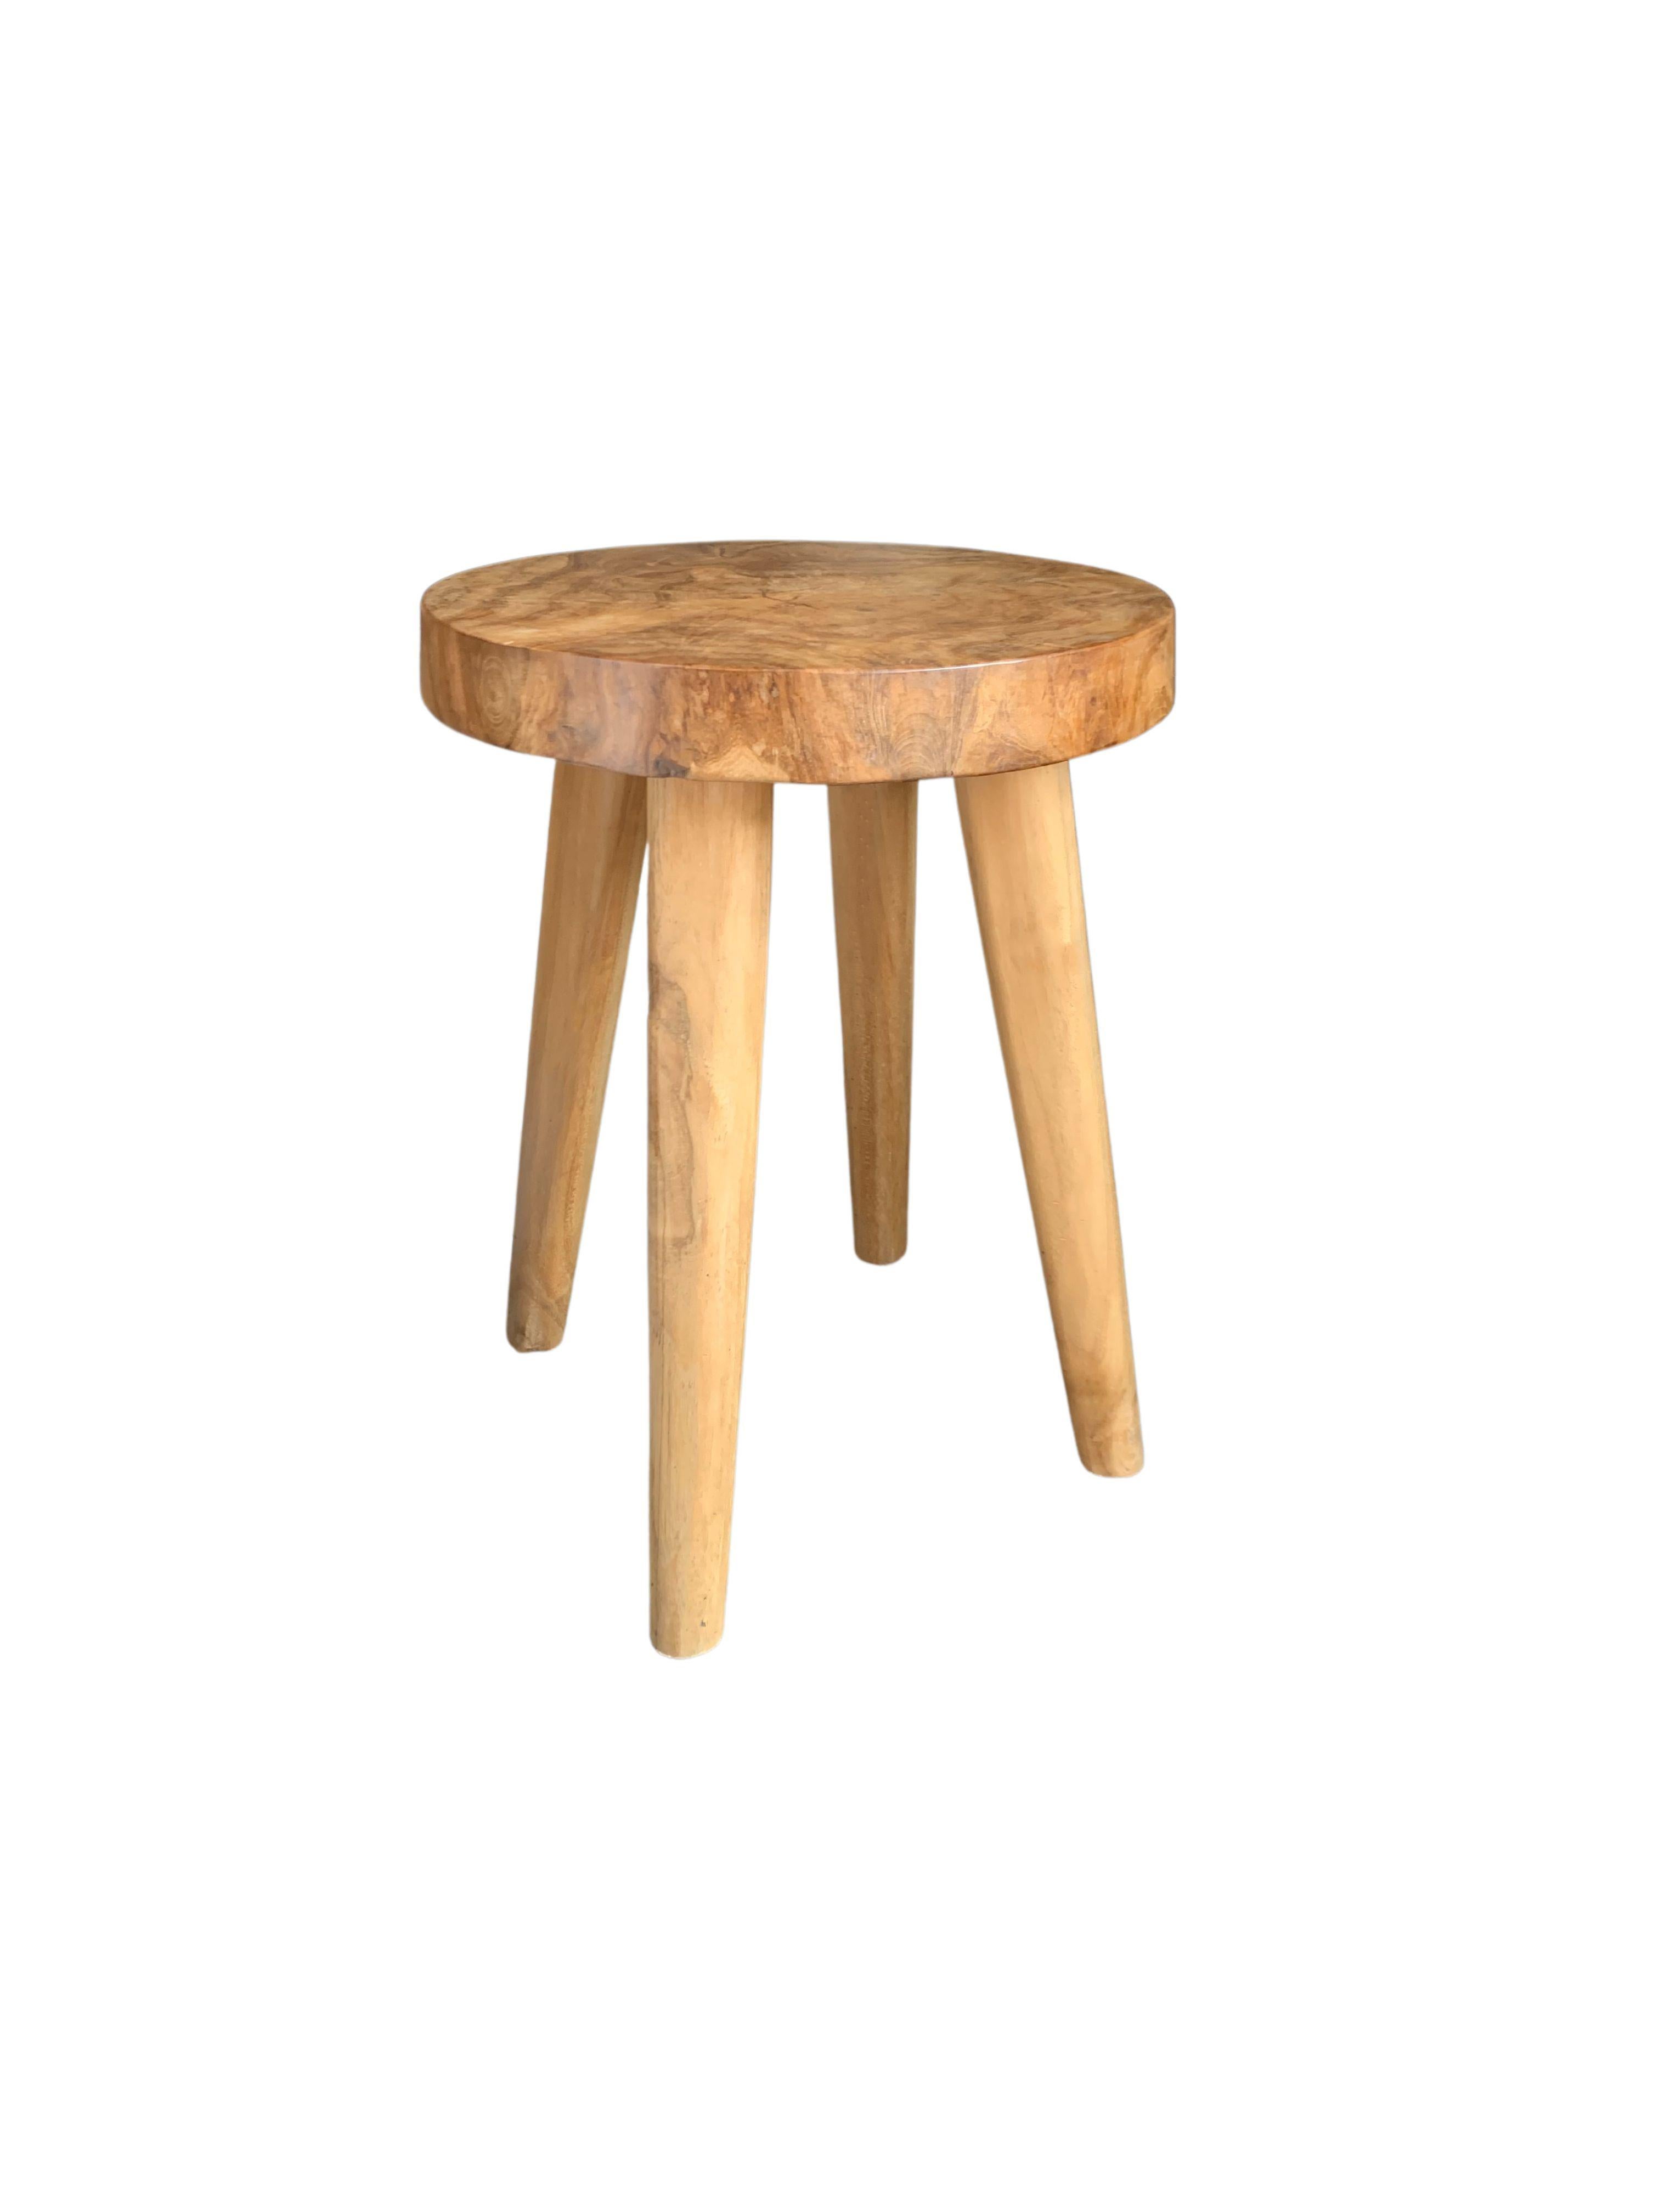 This wonderfully sculptural stool was crafted using mango wood. The chair sits on 4 slender legs. Its neutral pigment makes it perfect for any space. A uniquely sculptural and versatile piece certain to invoke conversation. This chair features a